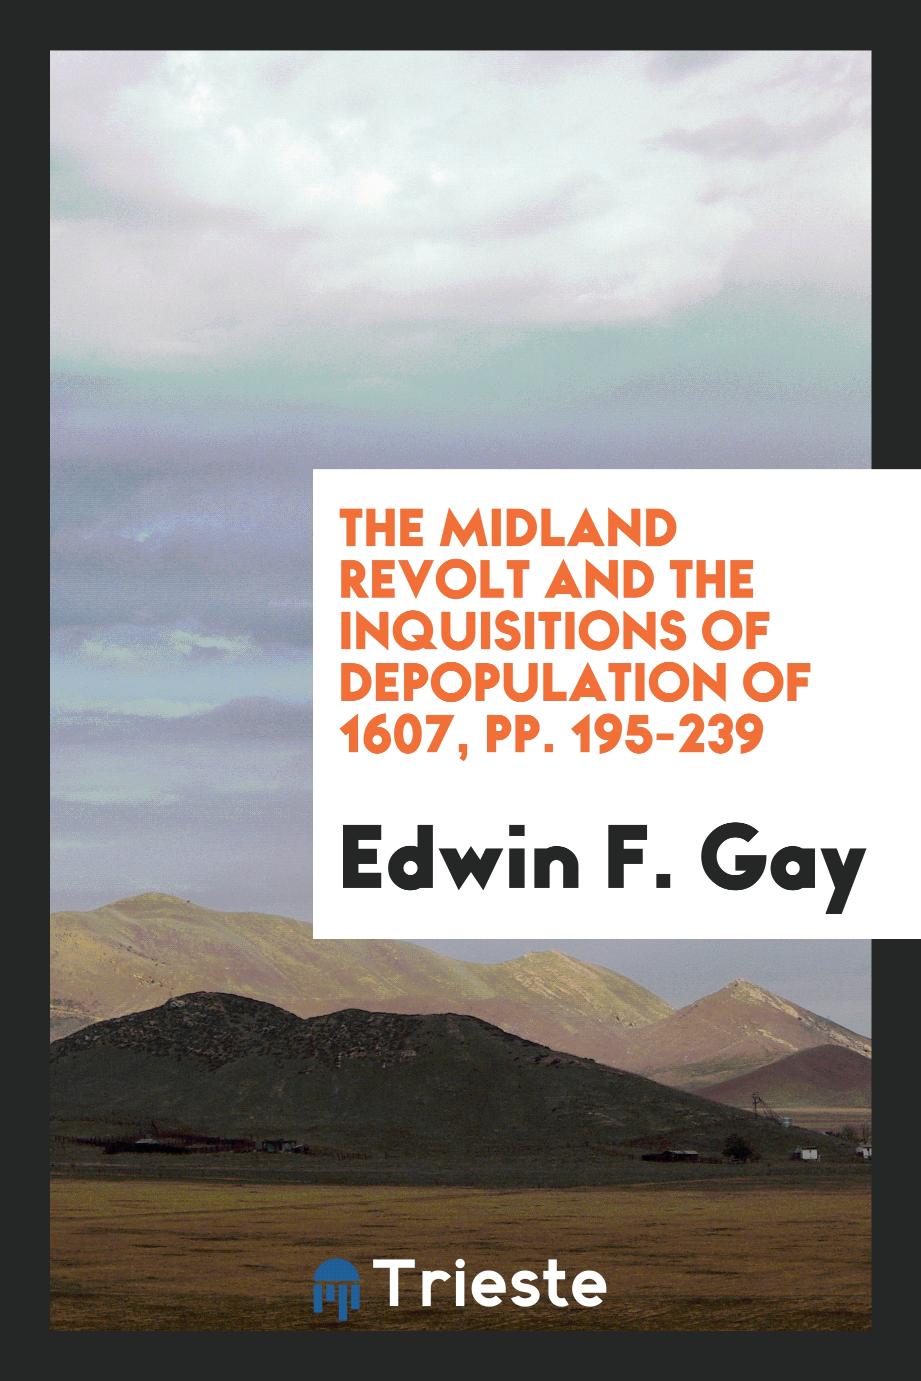 The Midland Revolt and the Inquisitions of Depopulation of 1607, pp. 195-239